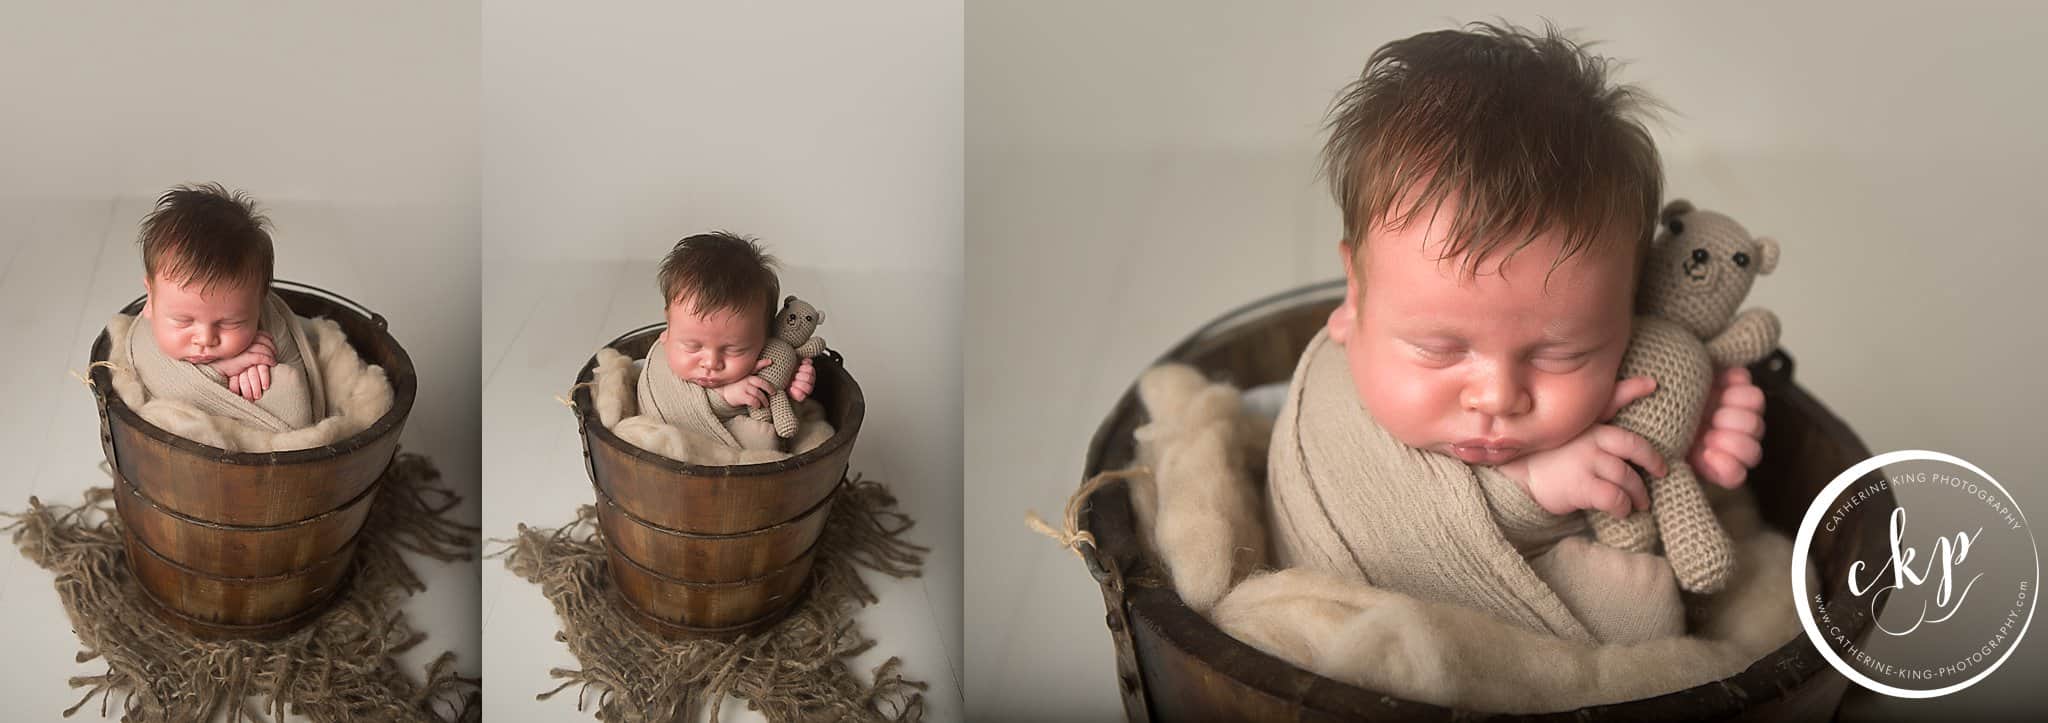 alex's newborn photography session in madison ct